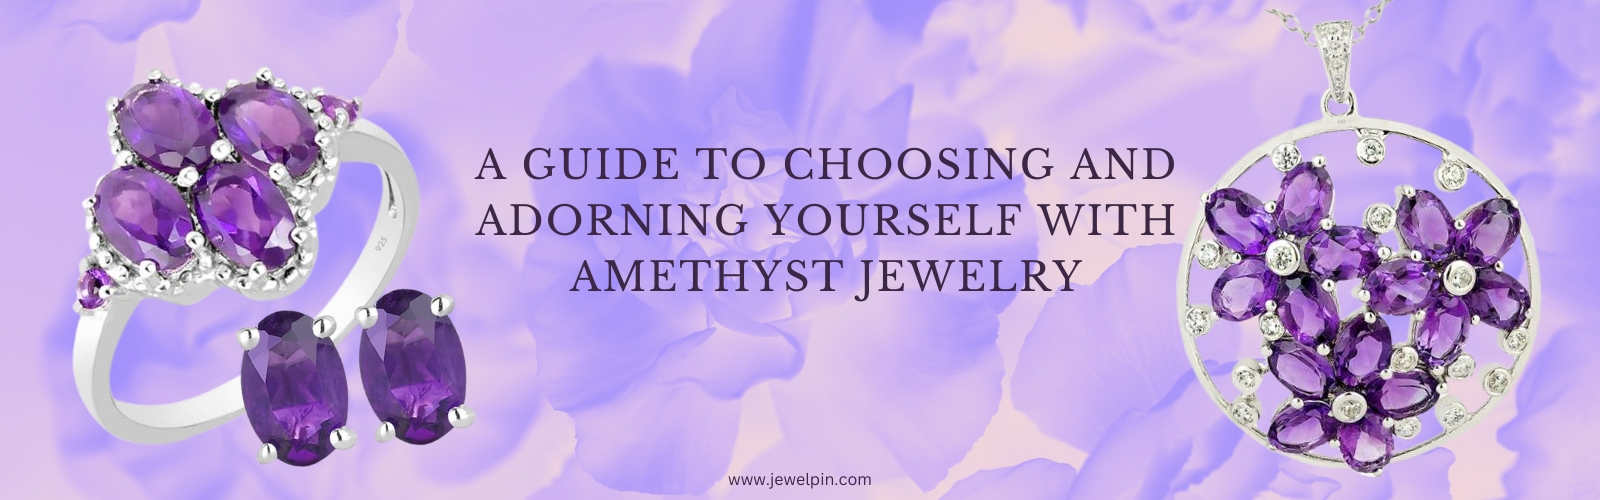 a guide to choosing and adorning yourself with amethyst jewellery